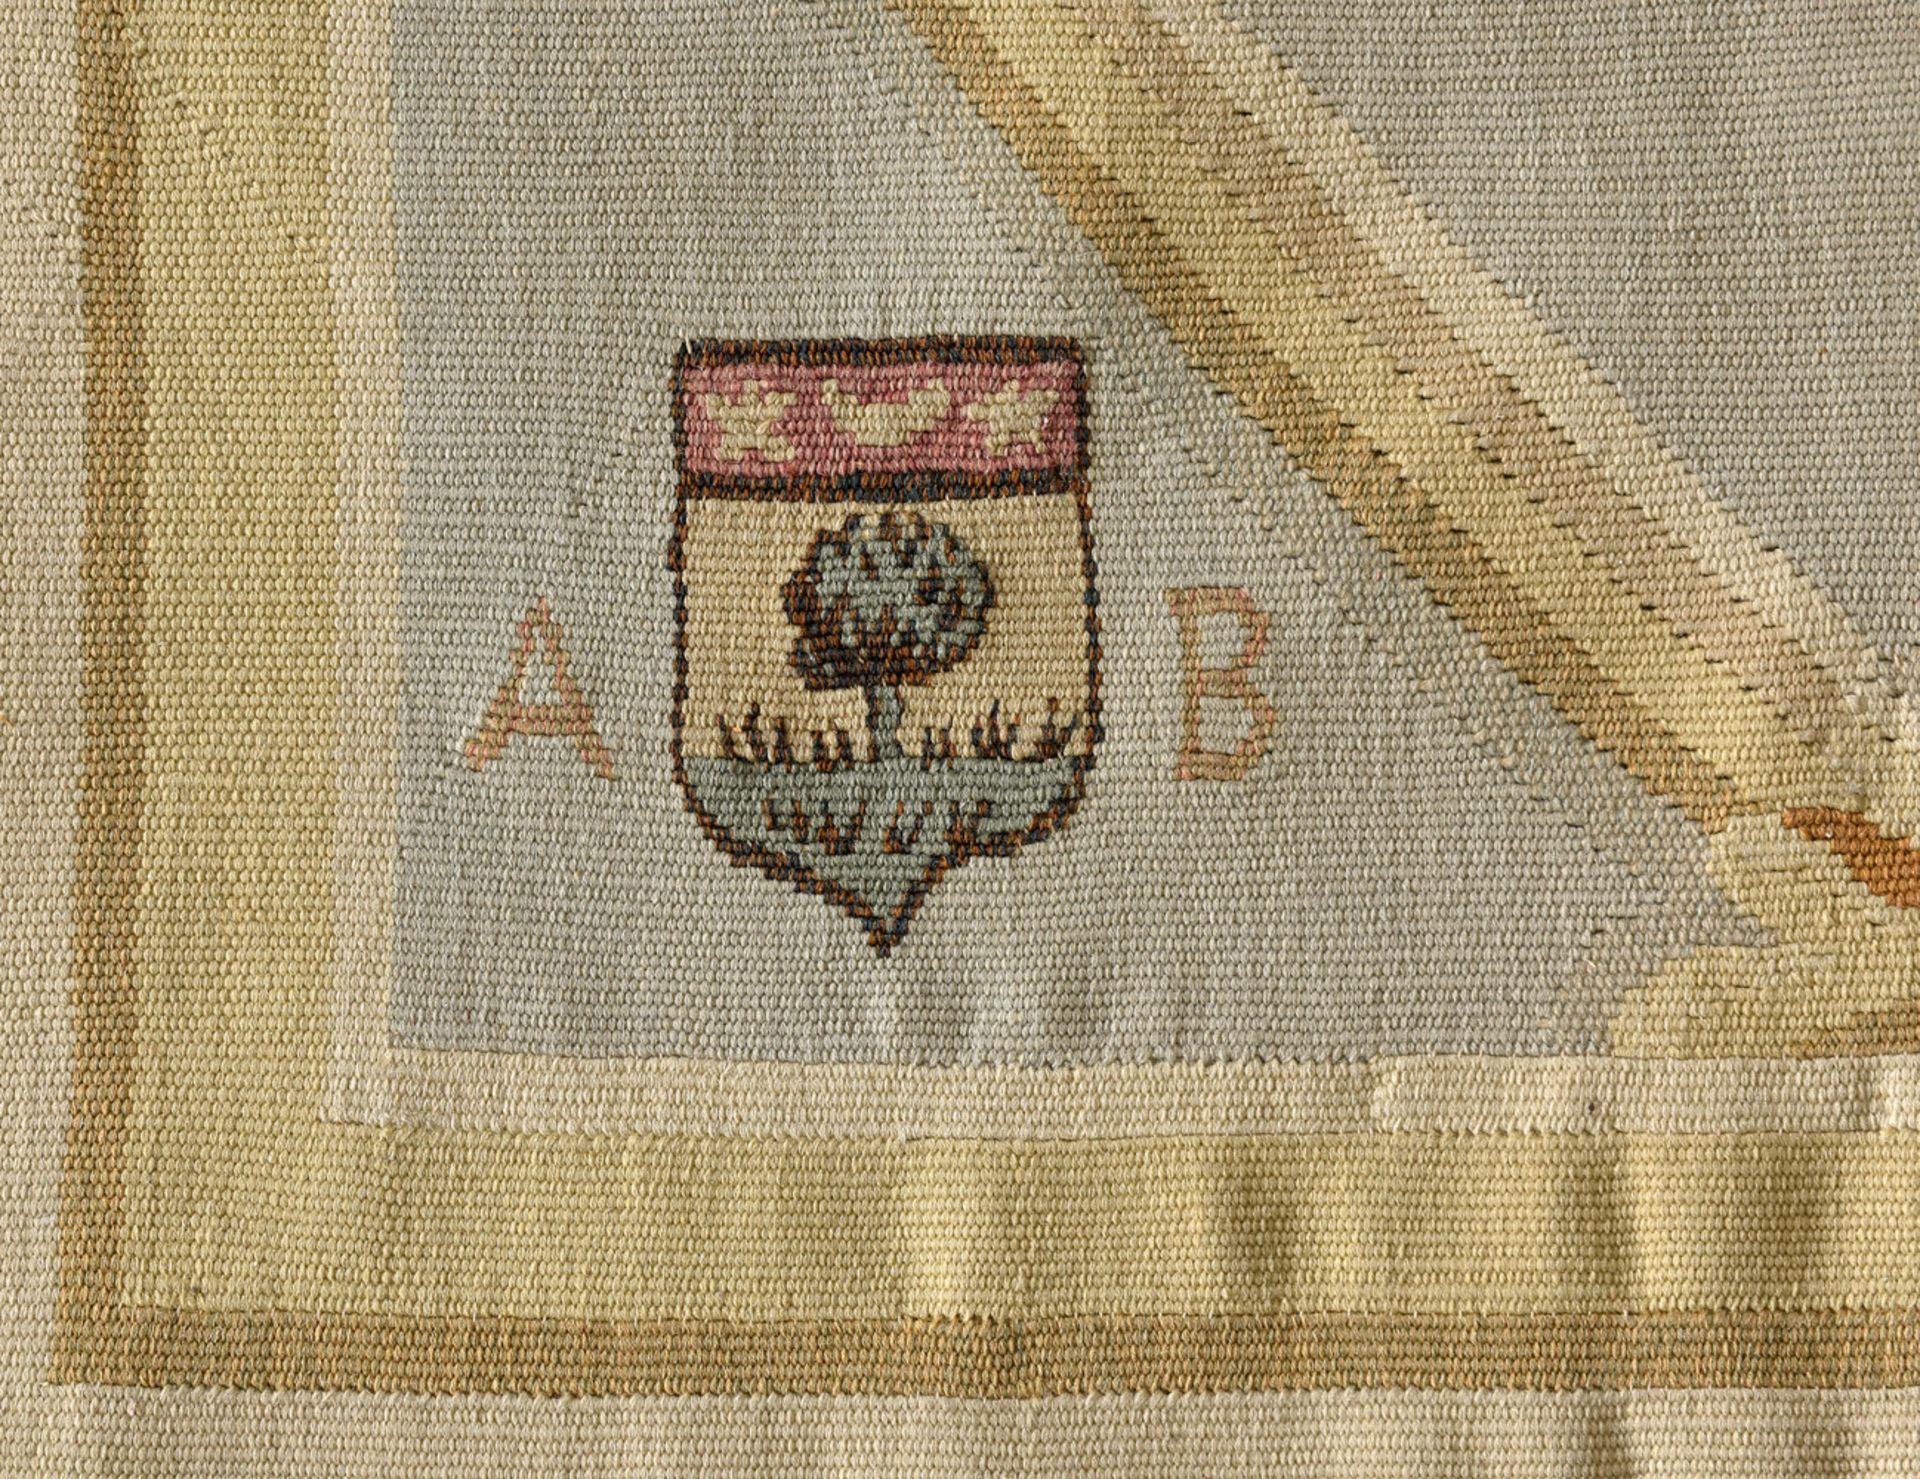 Aubusson-Teppich Ende 19. Jhdt. - Image 2 of 3